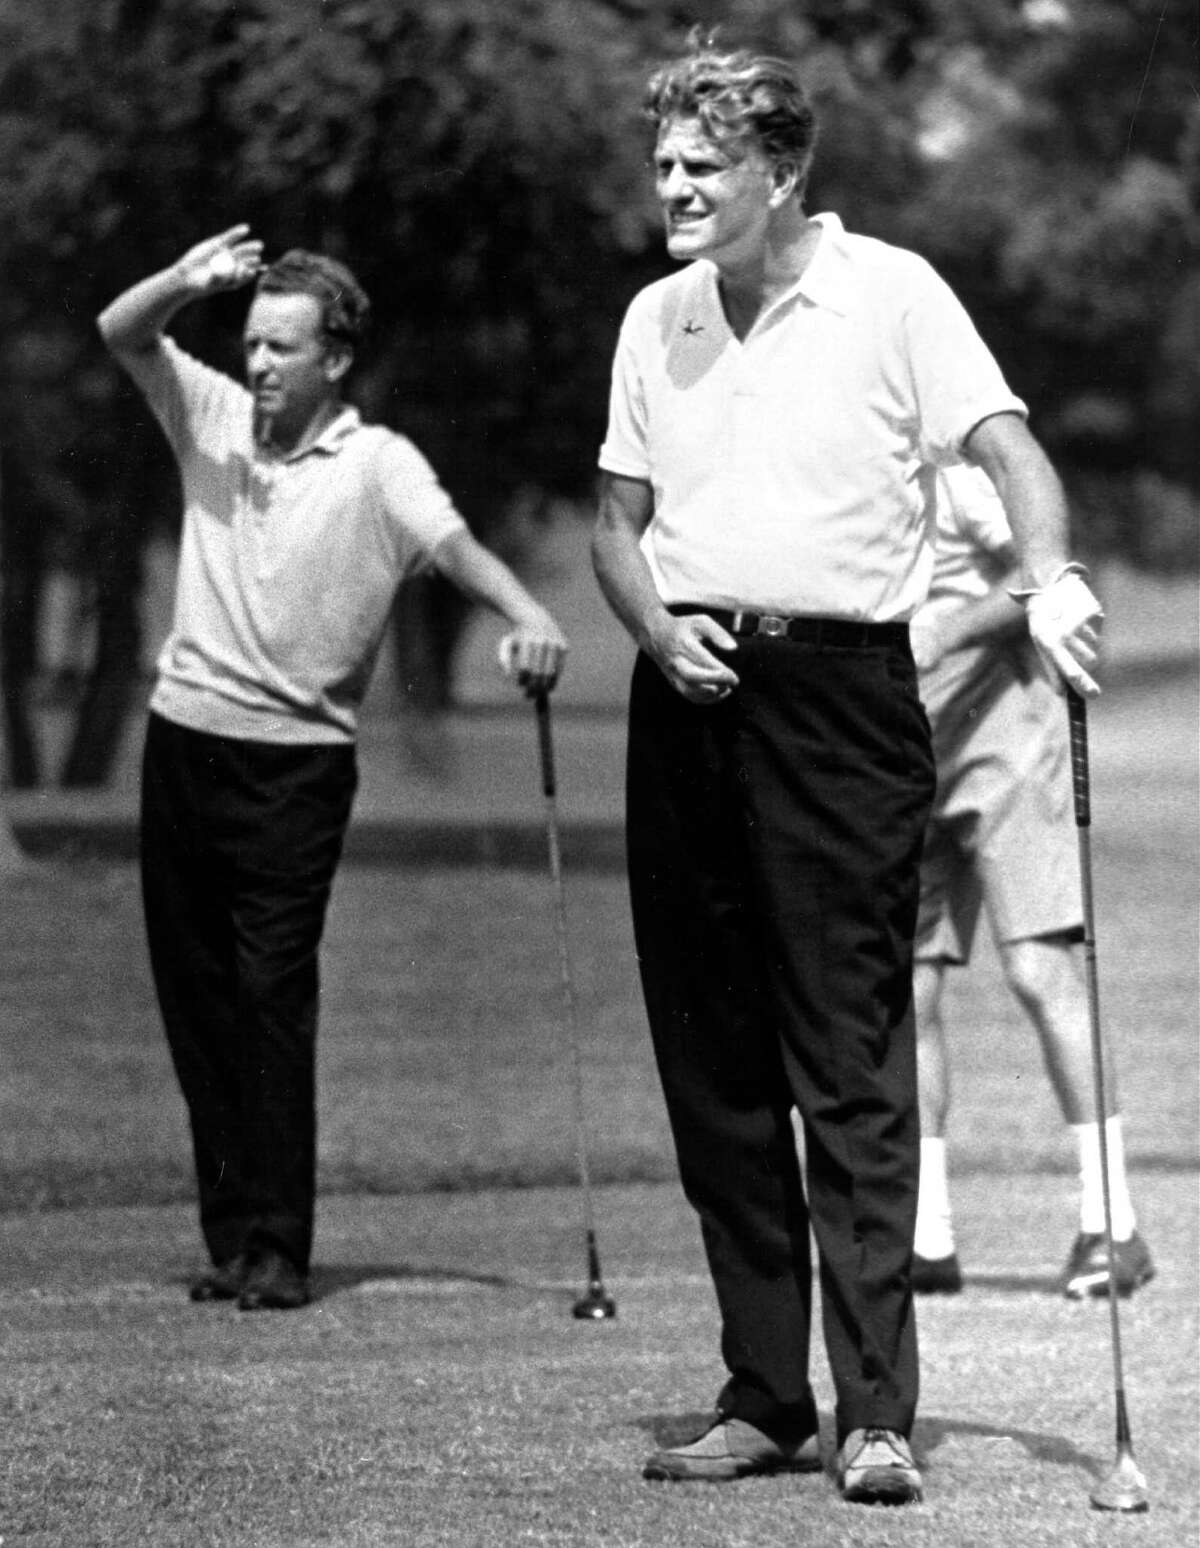 Billy Graham (right) watches his drive during a round of golf with Buckner Fanning while he was in San Antonio for the 1968 Crusade. At left is Buckner Fanning.